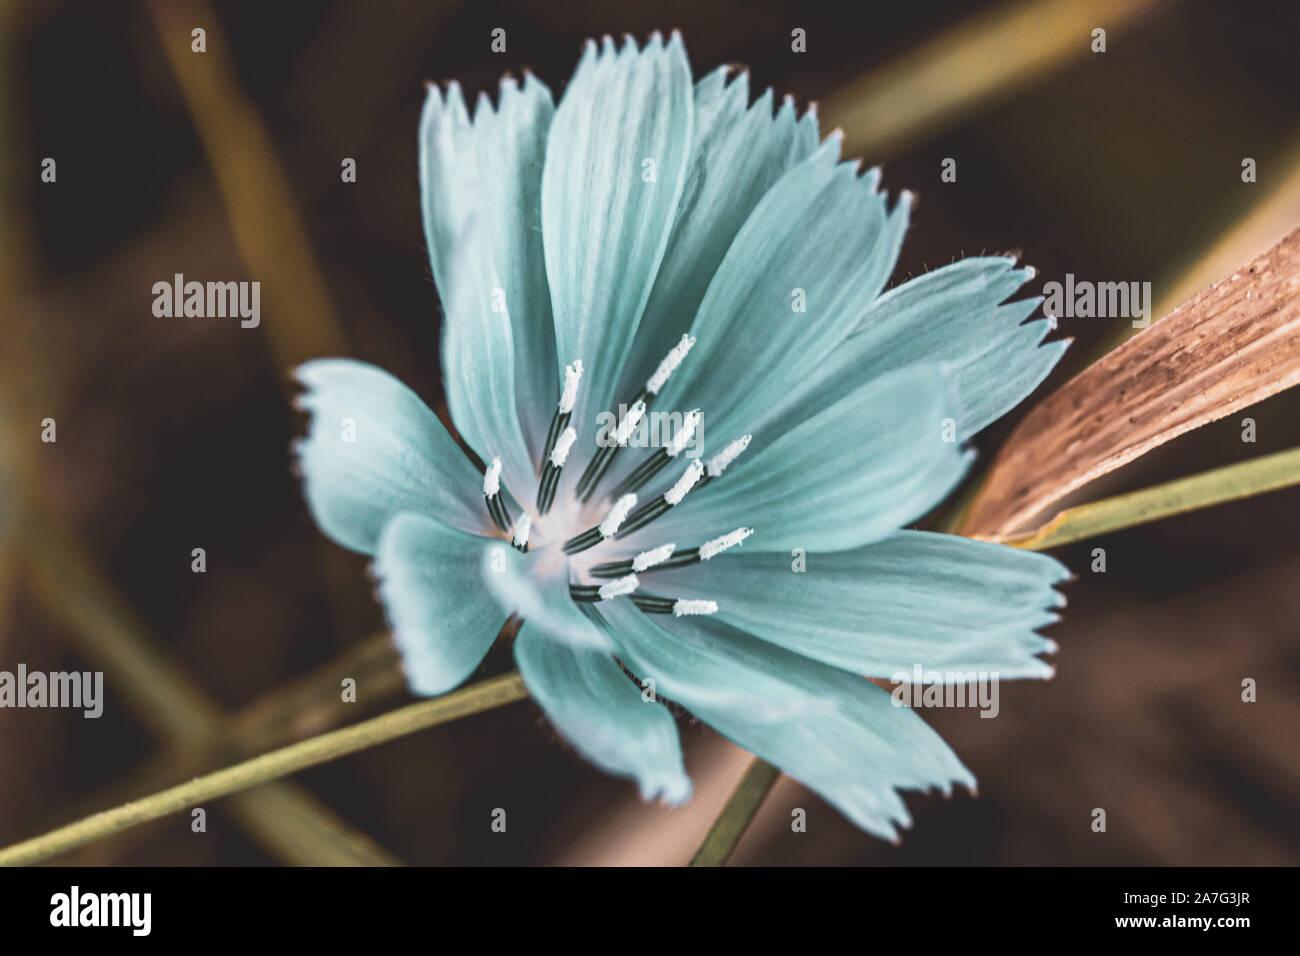 Details of a Pale Blue Autumn Flower in Bloom Stock Photo